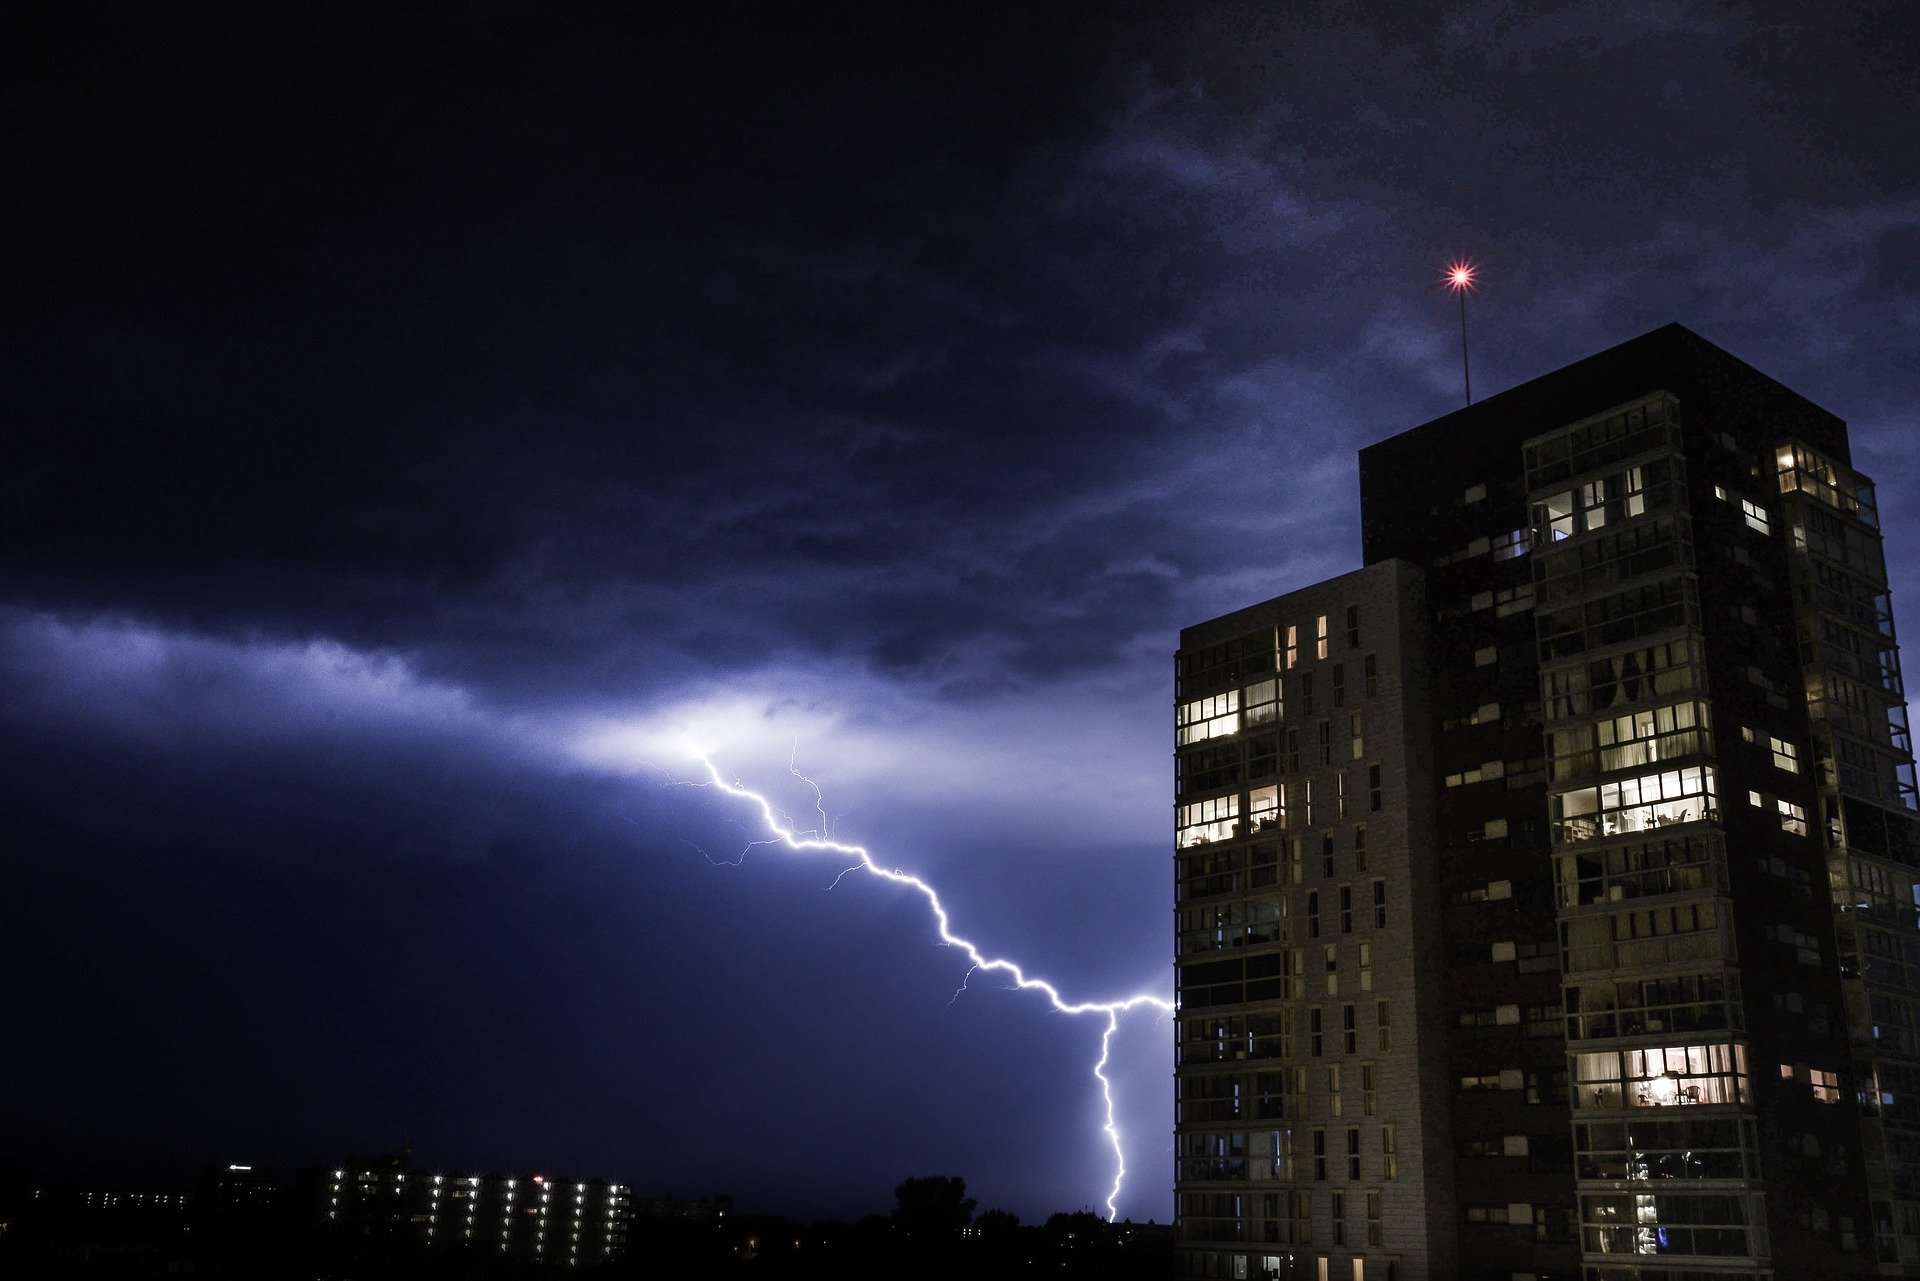 Pictured - A photo of a thunder weather storm and lightning during nighttime | Source: Pixabay